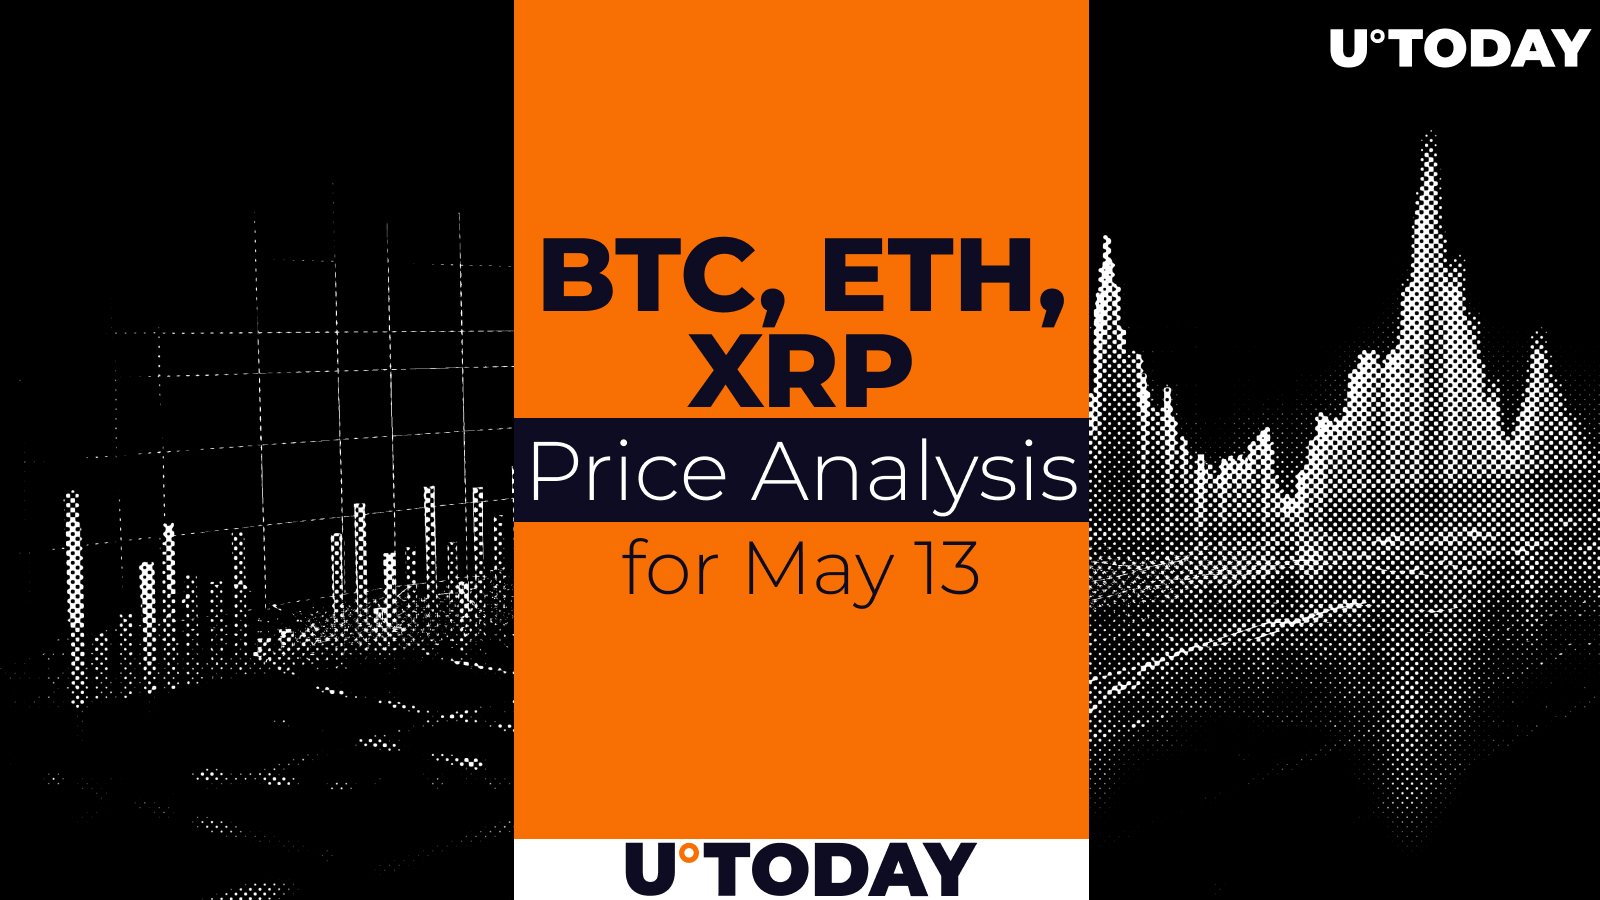 BTC, ETH and XRP Price Prediction for May 13